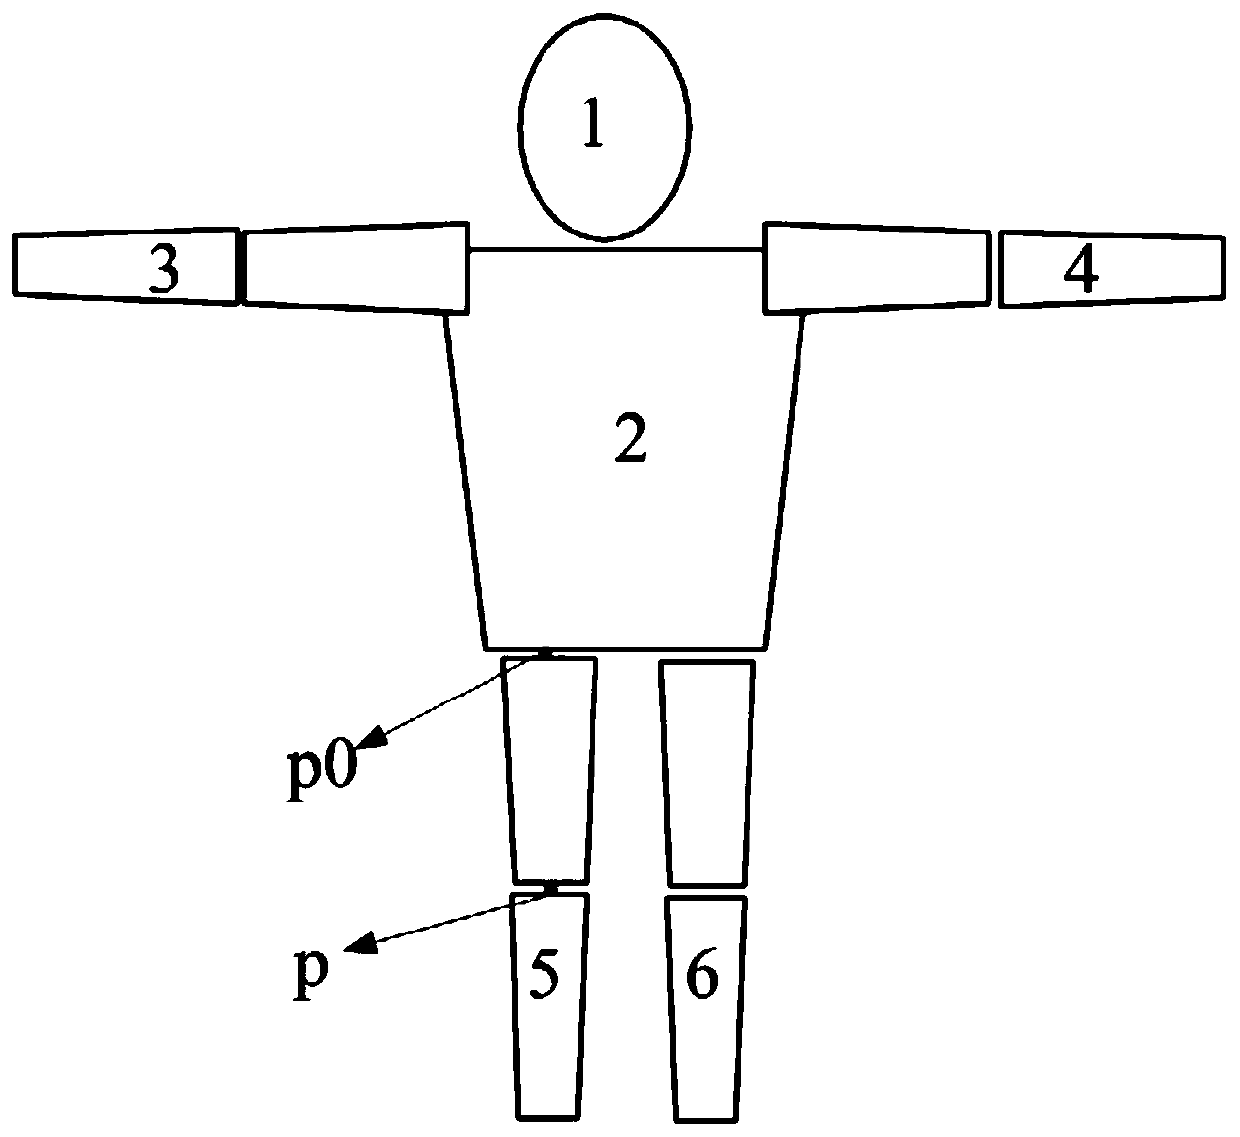 Human body motion posture capturing method and system